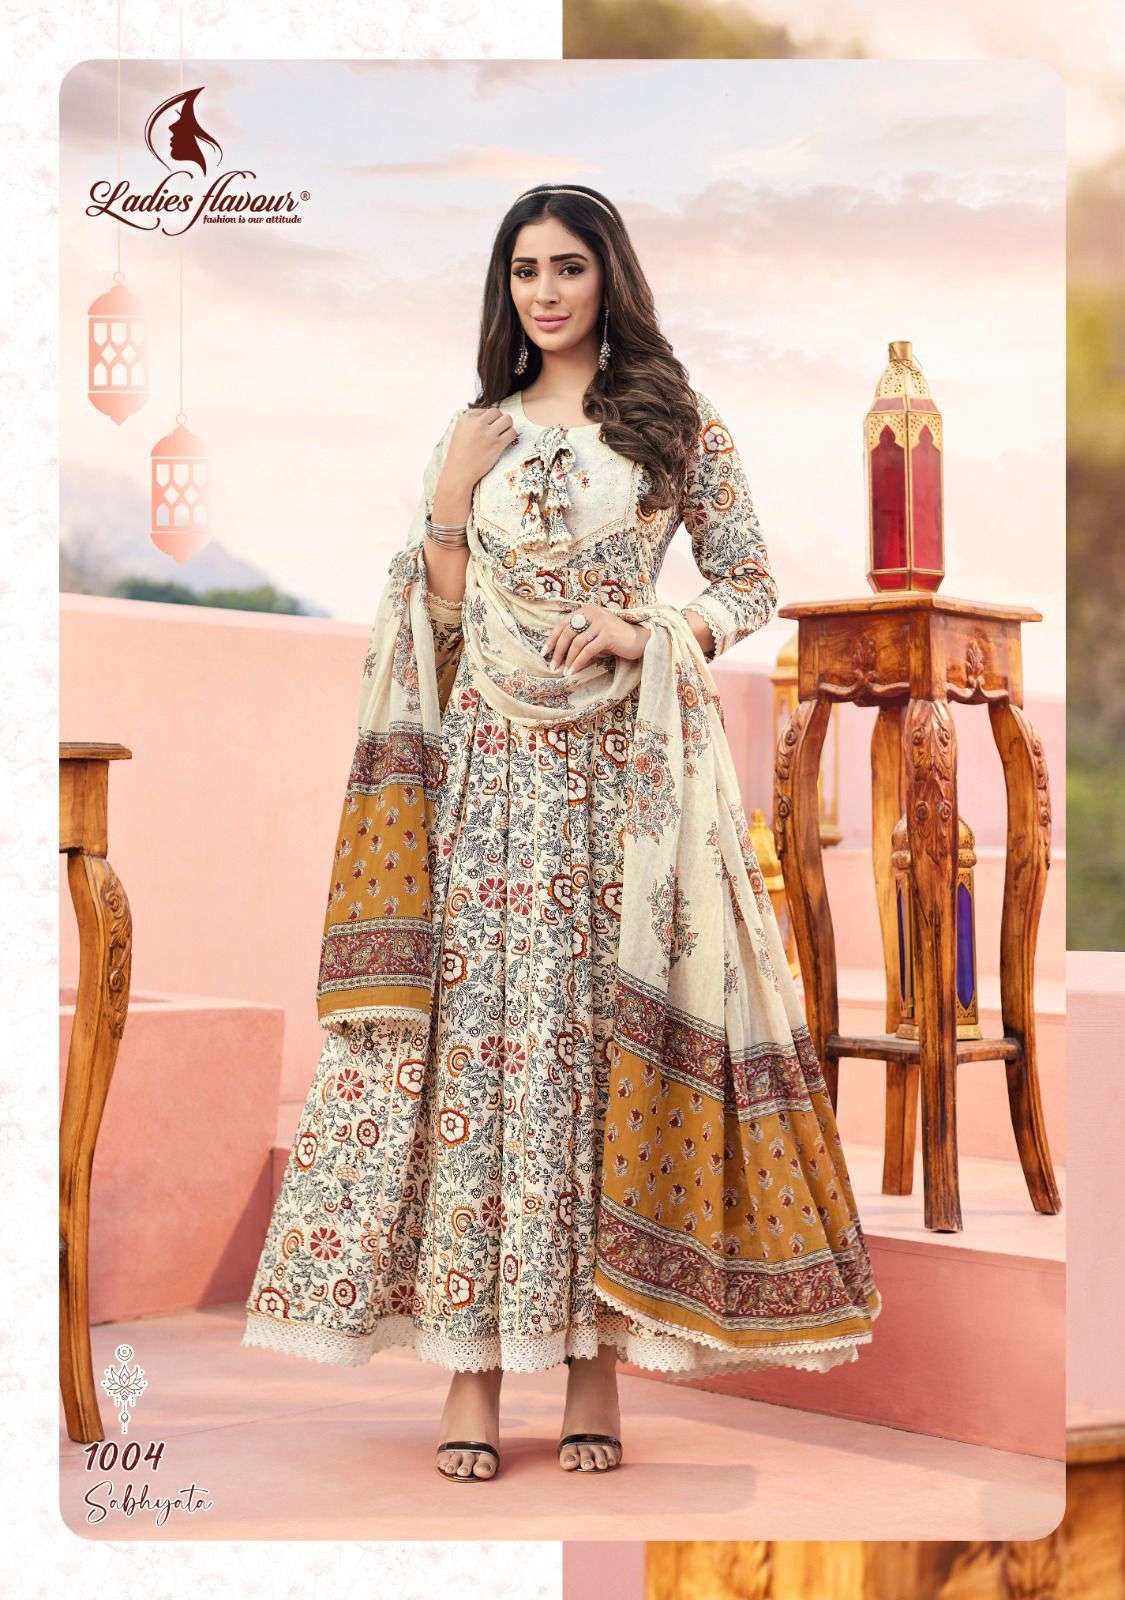 Sabhyata By Ladies Flavour 1001 To 1004 Series Beautiful Stylish Fancy Colorful Casual Wear & Ethnic Wear Pure Cotton Gowns With Dupatta At Wholesale Price